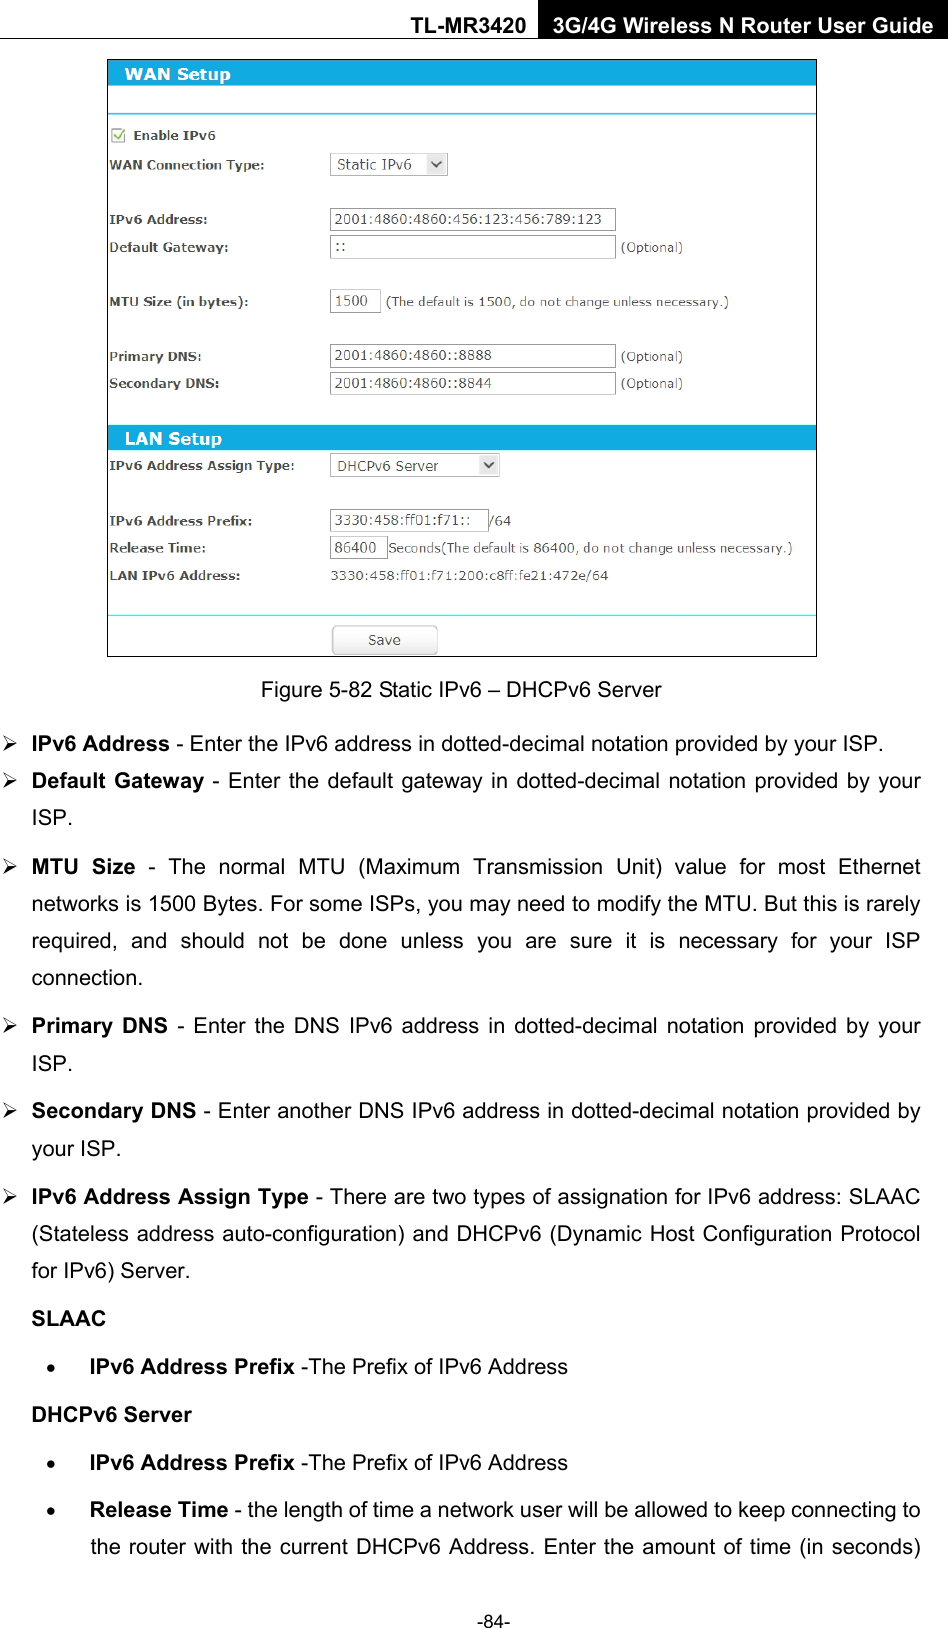    -84- TL-MR3420 3G/4G Wireless N Router User Guide  Figure 5-82 Static IPv6 – DHCPv6 Server  IPv6 Address - Enter the IPv6 address in dotted-decimal notation provided by your ISP.  Default Gateway - Enter the default gateway in dotted-decimal notation provided by your ISP.  MTU Size - The normal MTU (Maximum Transmission Unit) value for most Ethernet networks is 1500 Bytes. For some ISPs, you may need to modify the MTU. But this is rarely required, and should not be done unless you are sure it is necessary for your ISP connection.  Primary DNS - Enter the DNS IPv6 address in dotted-decimal notation provided by your ISP.  Secondary DNS - Enter another DNS IPv6 address in dotted-decimal notation provided by your ISP.  IPv6 Address Assign Type - There are two types of assignation for IPv6 address: SLAAC (Stateless address auto-configuration) and DHCPv6 (Dynamic Host Configuration Protocol for IPv6) Server. SLAAC • IPv6 Address Prefix -The Prefix of IPv6 Address DHCPv6 Server • IPv6 Address Prefix -The Prefix of IPv6 Address • Release Time - the length of time a network user will be allowed to keep connecting to the router with the current DHCPv6 Address. Enter the amount of time (in seconds) 